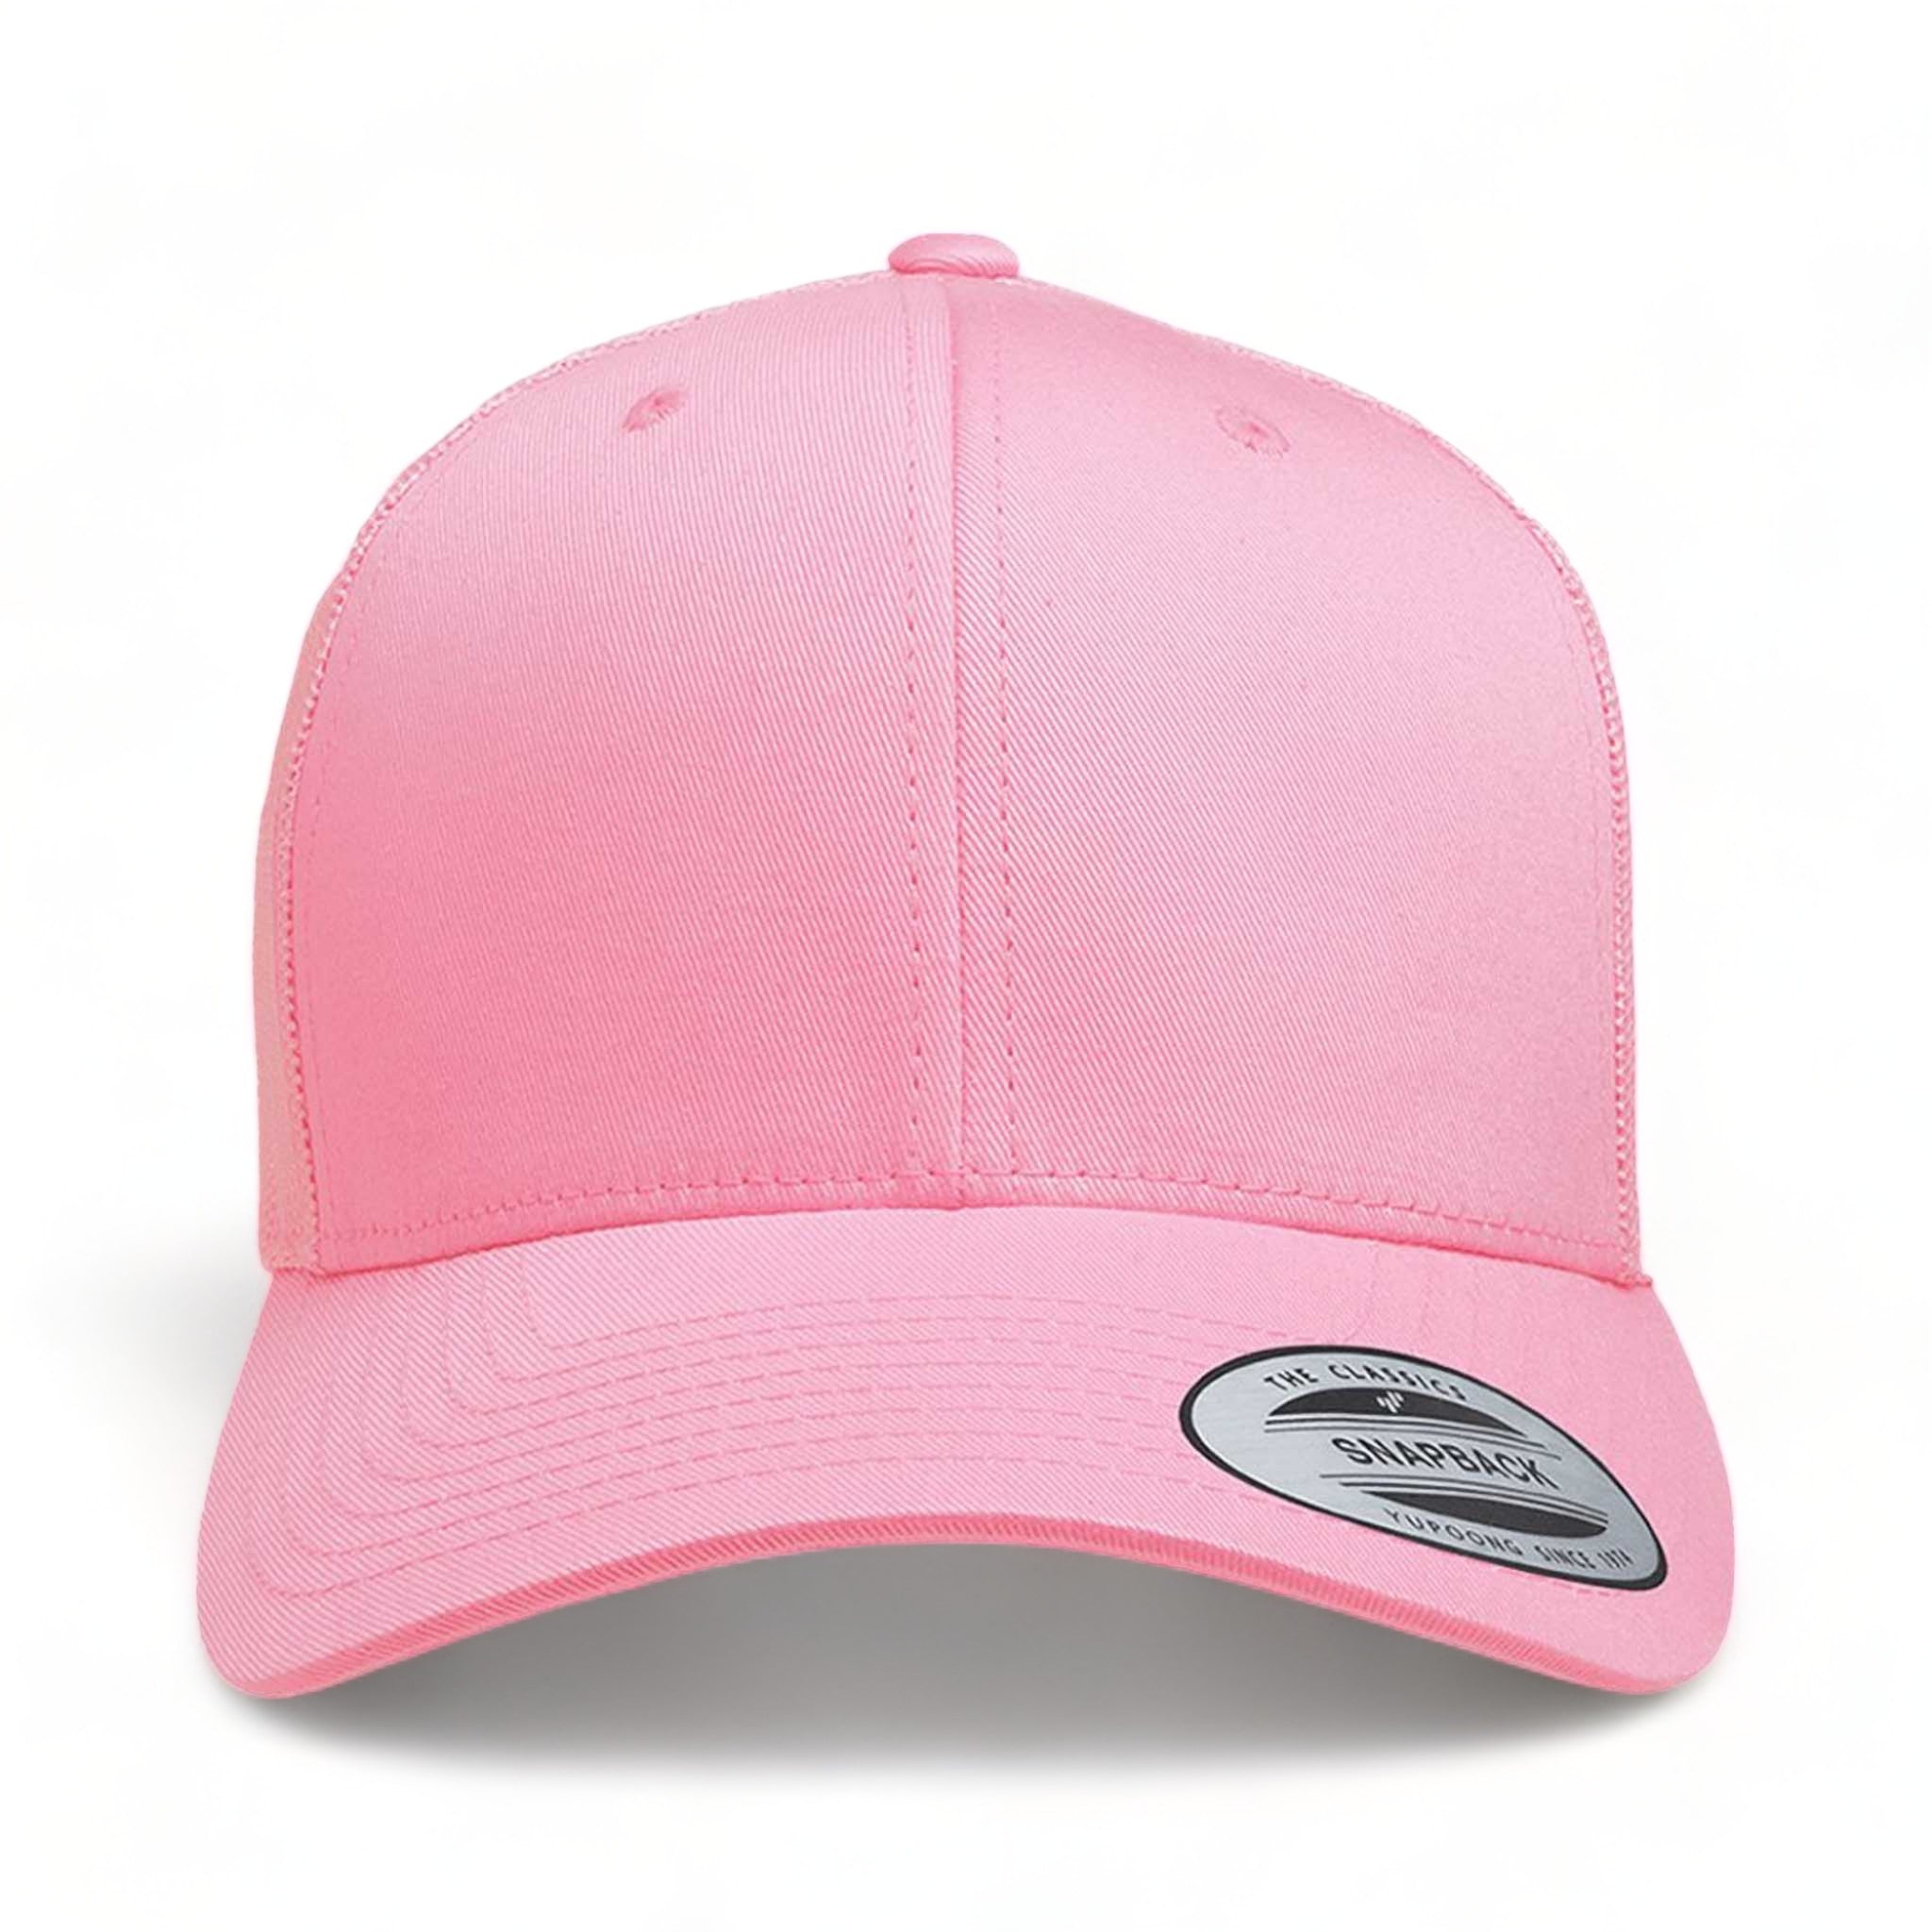 Front view of YP Classics 6606 custom hat in pink